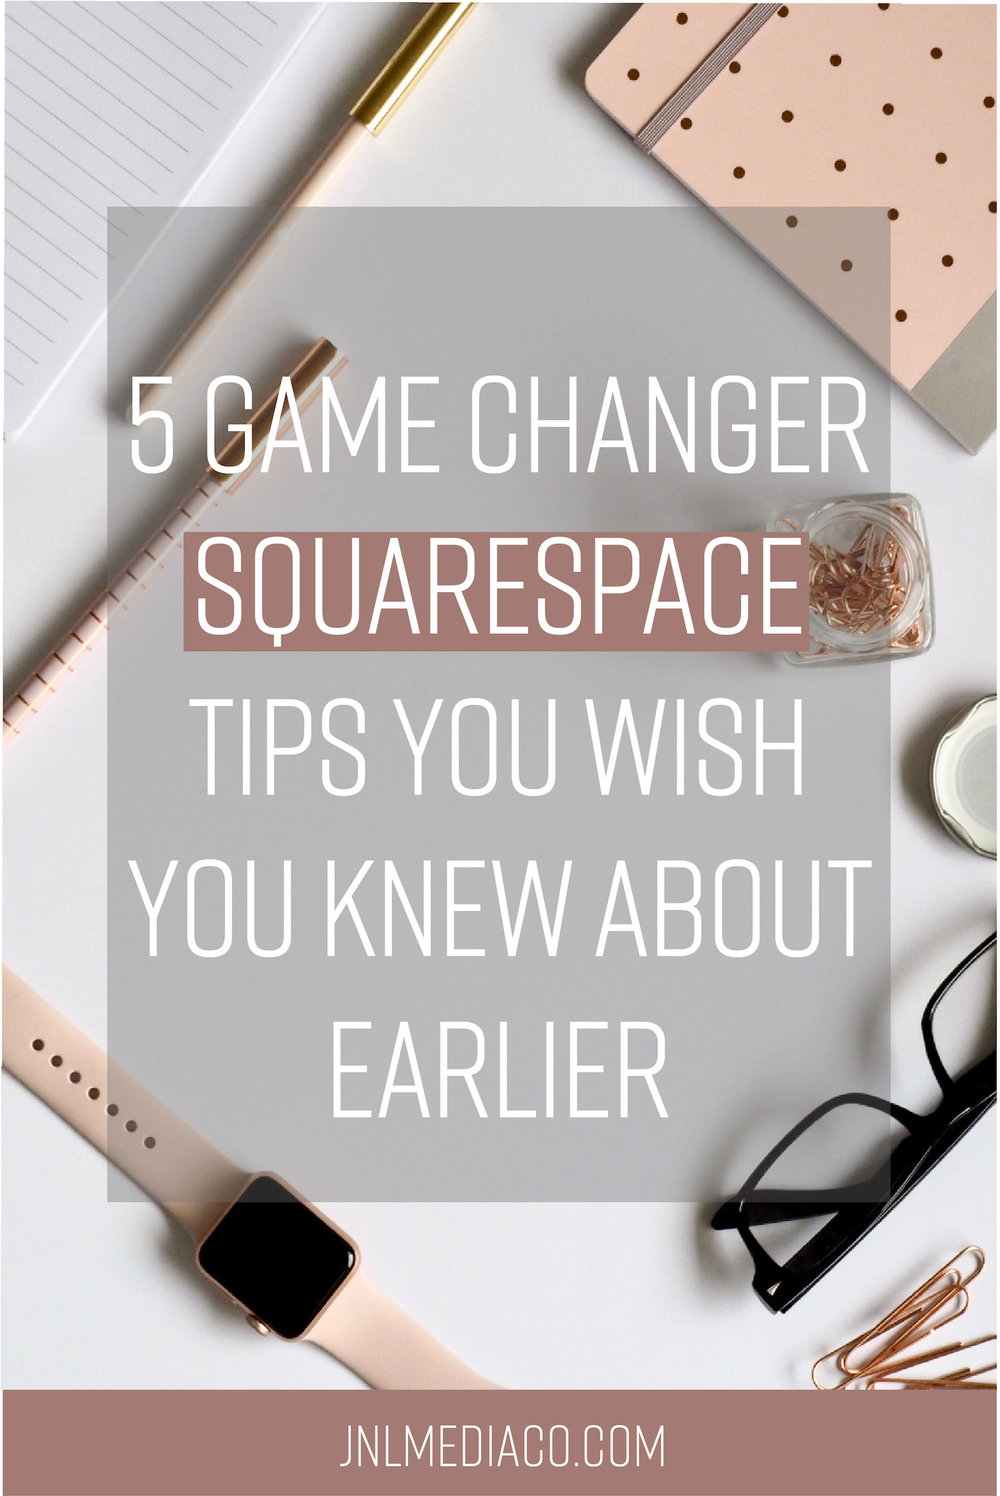 5 game changer squarespace tips you wish you knew about earlier